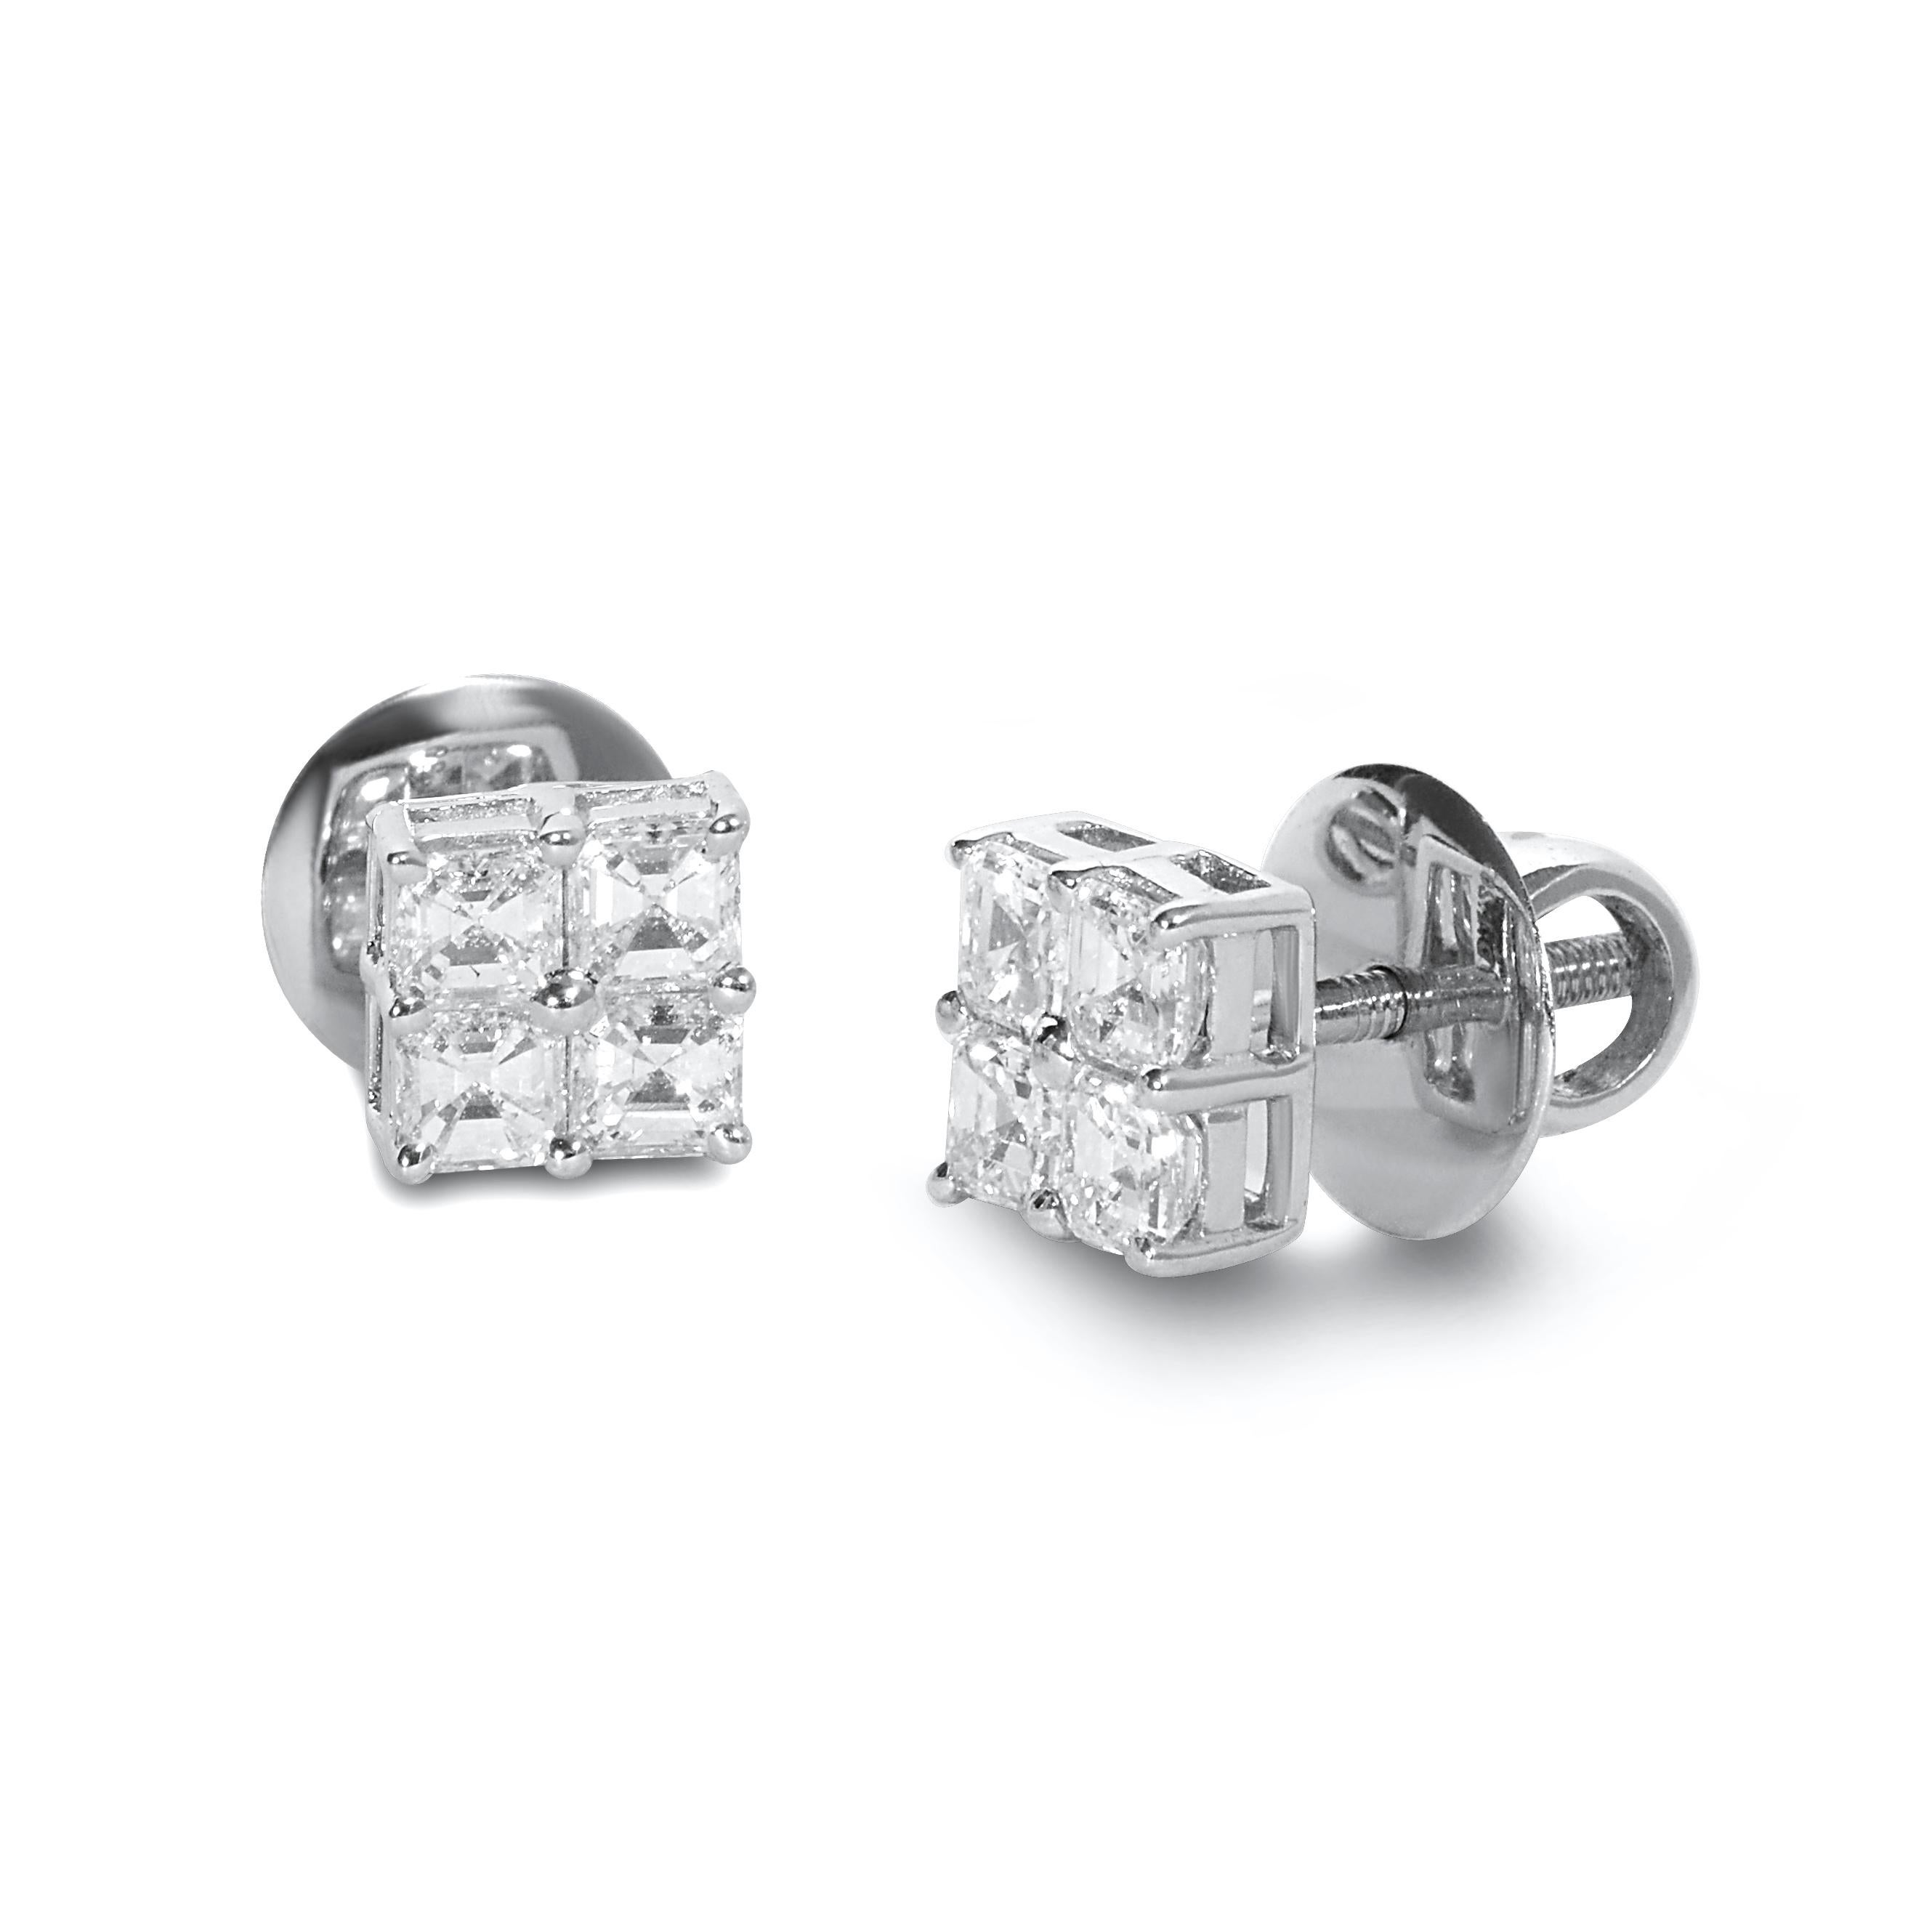 18 Karat White Gold Asscher Cut Diamond Stud Earrings

Elegant ear studs set in 18 karat white gold studded with white asscher cut diamonds (VVS-VS Purity). These ear studs are ideal for every day wear.

Asscher Cut Diamonds - 1.20cts 